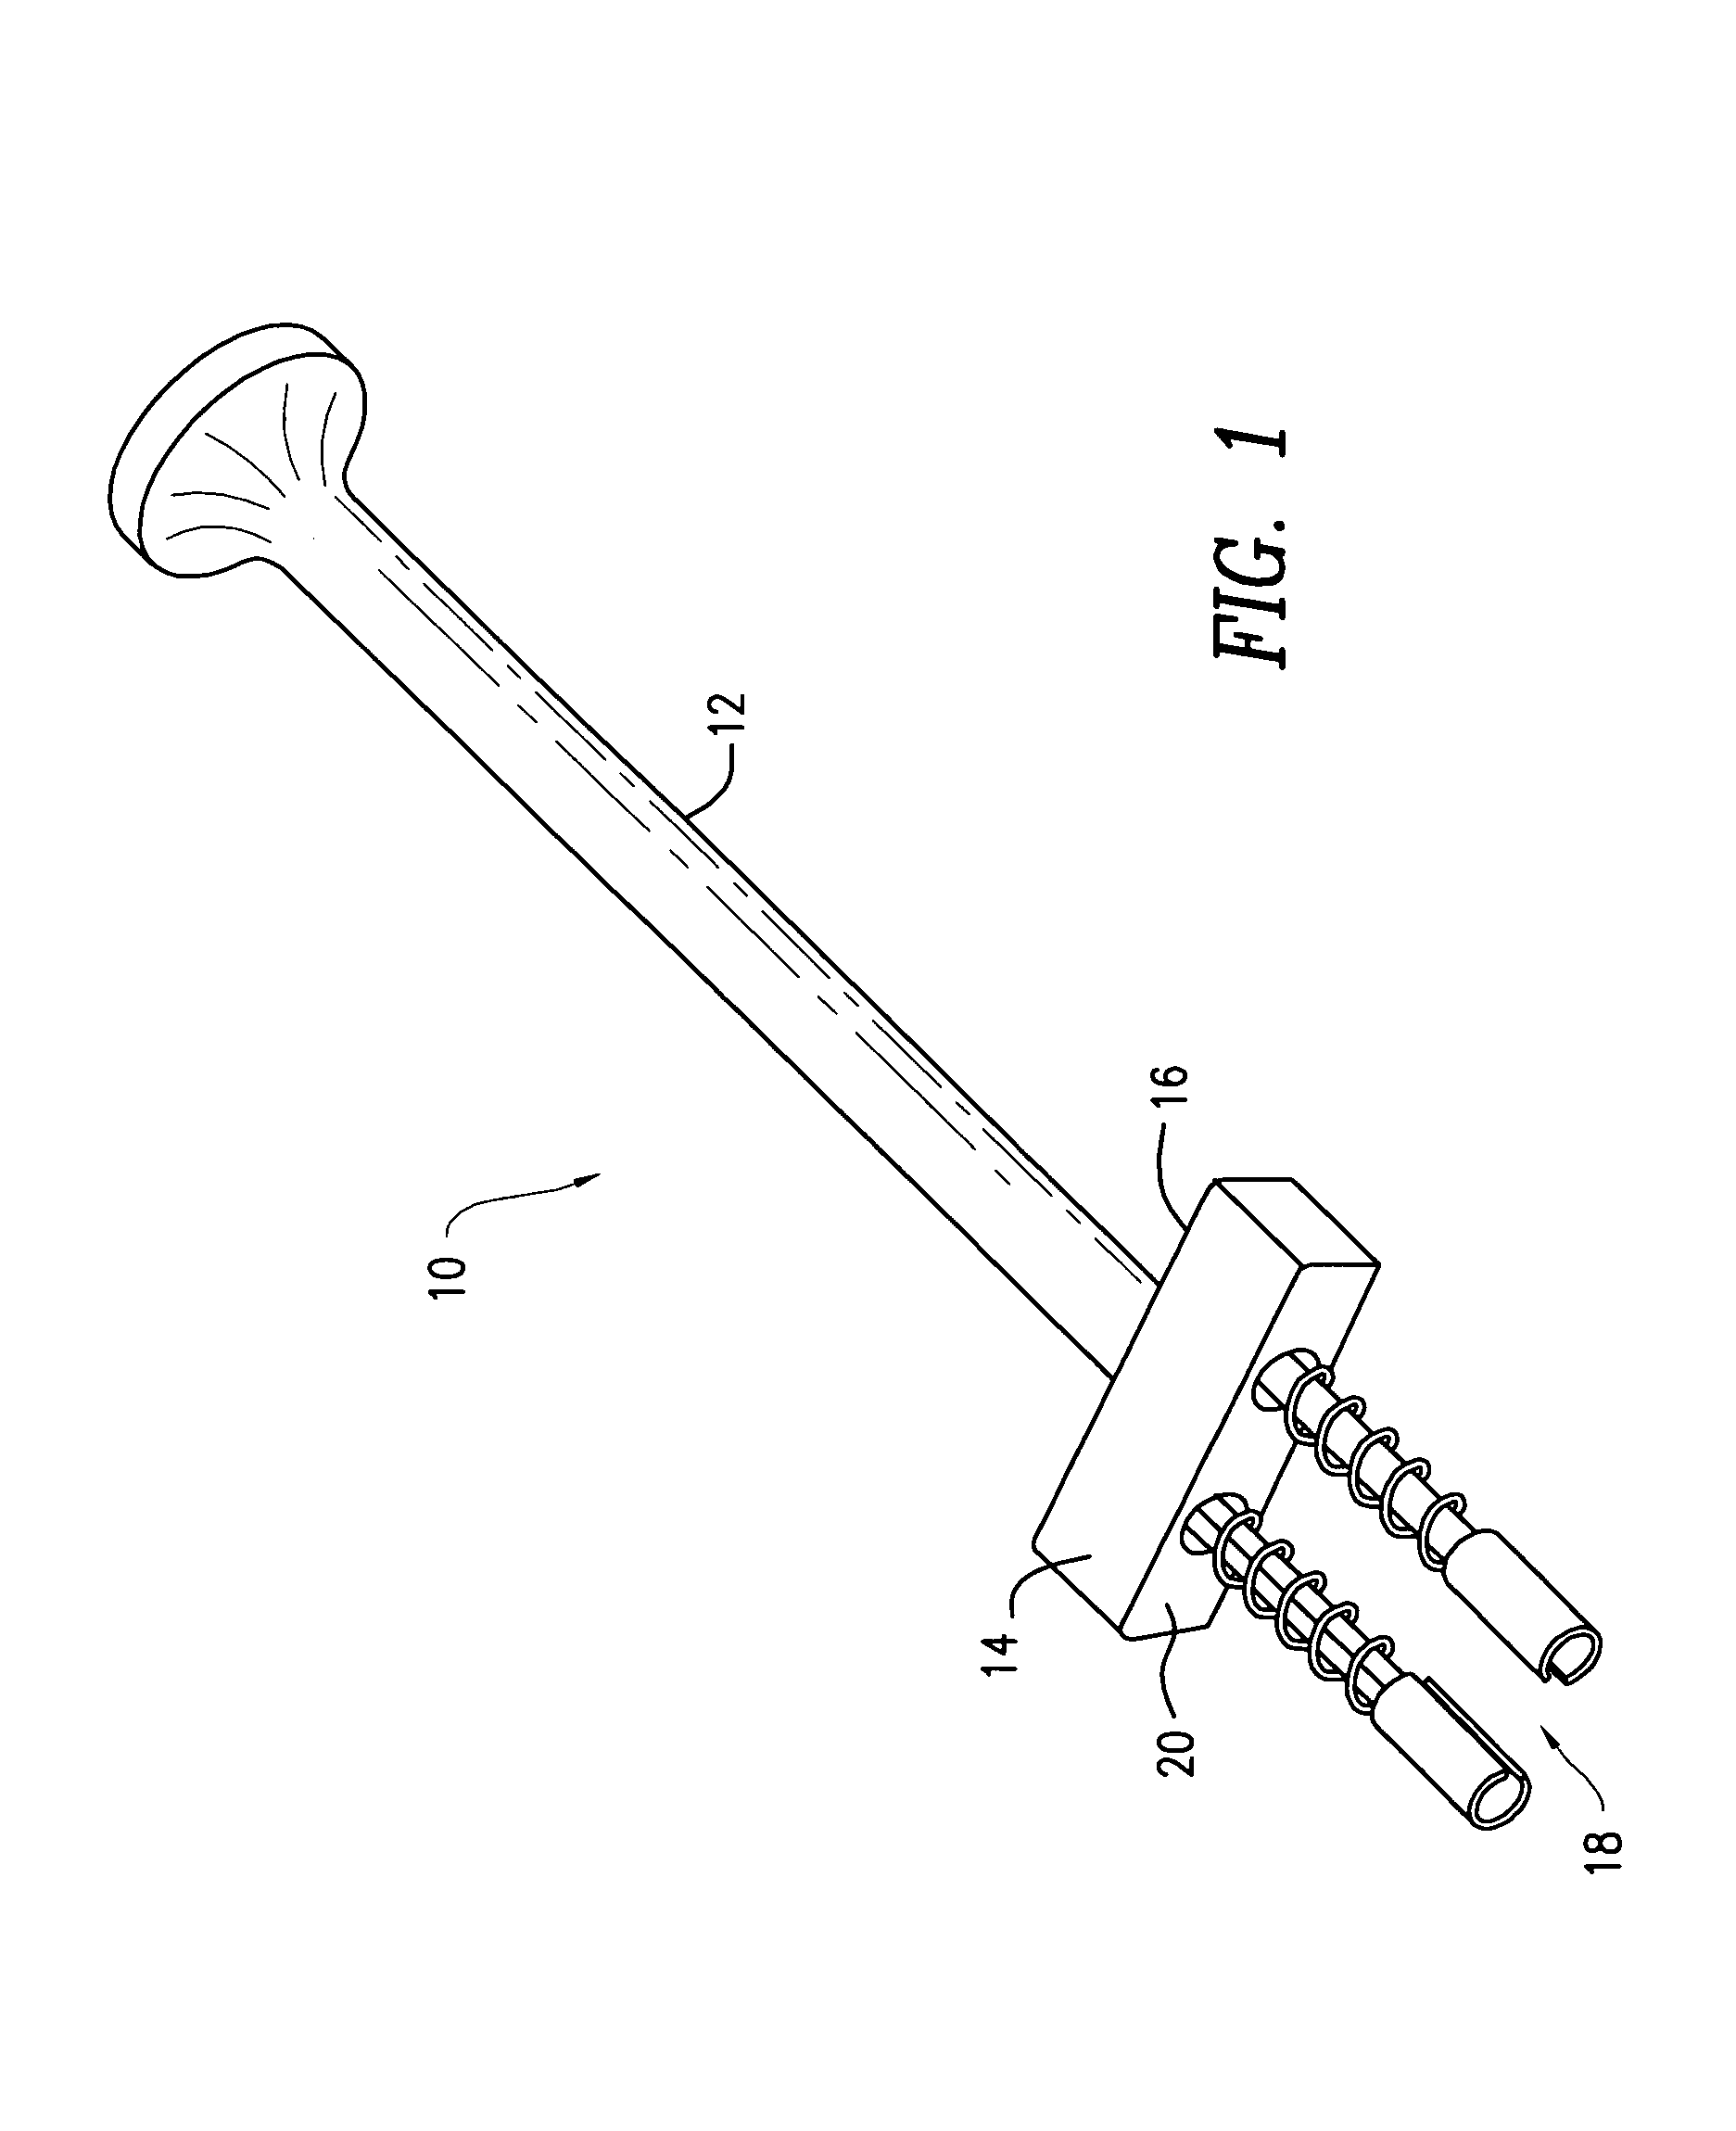 Surgical anchor inserter